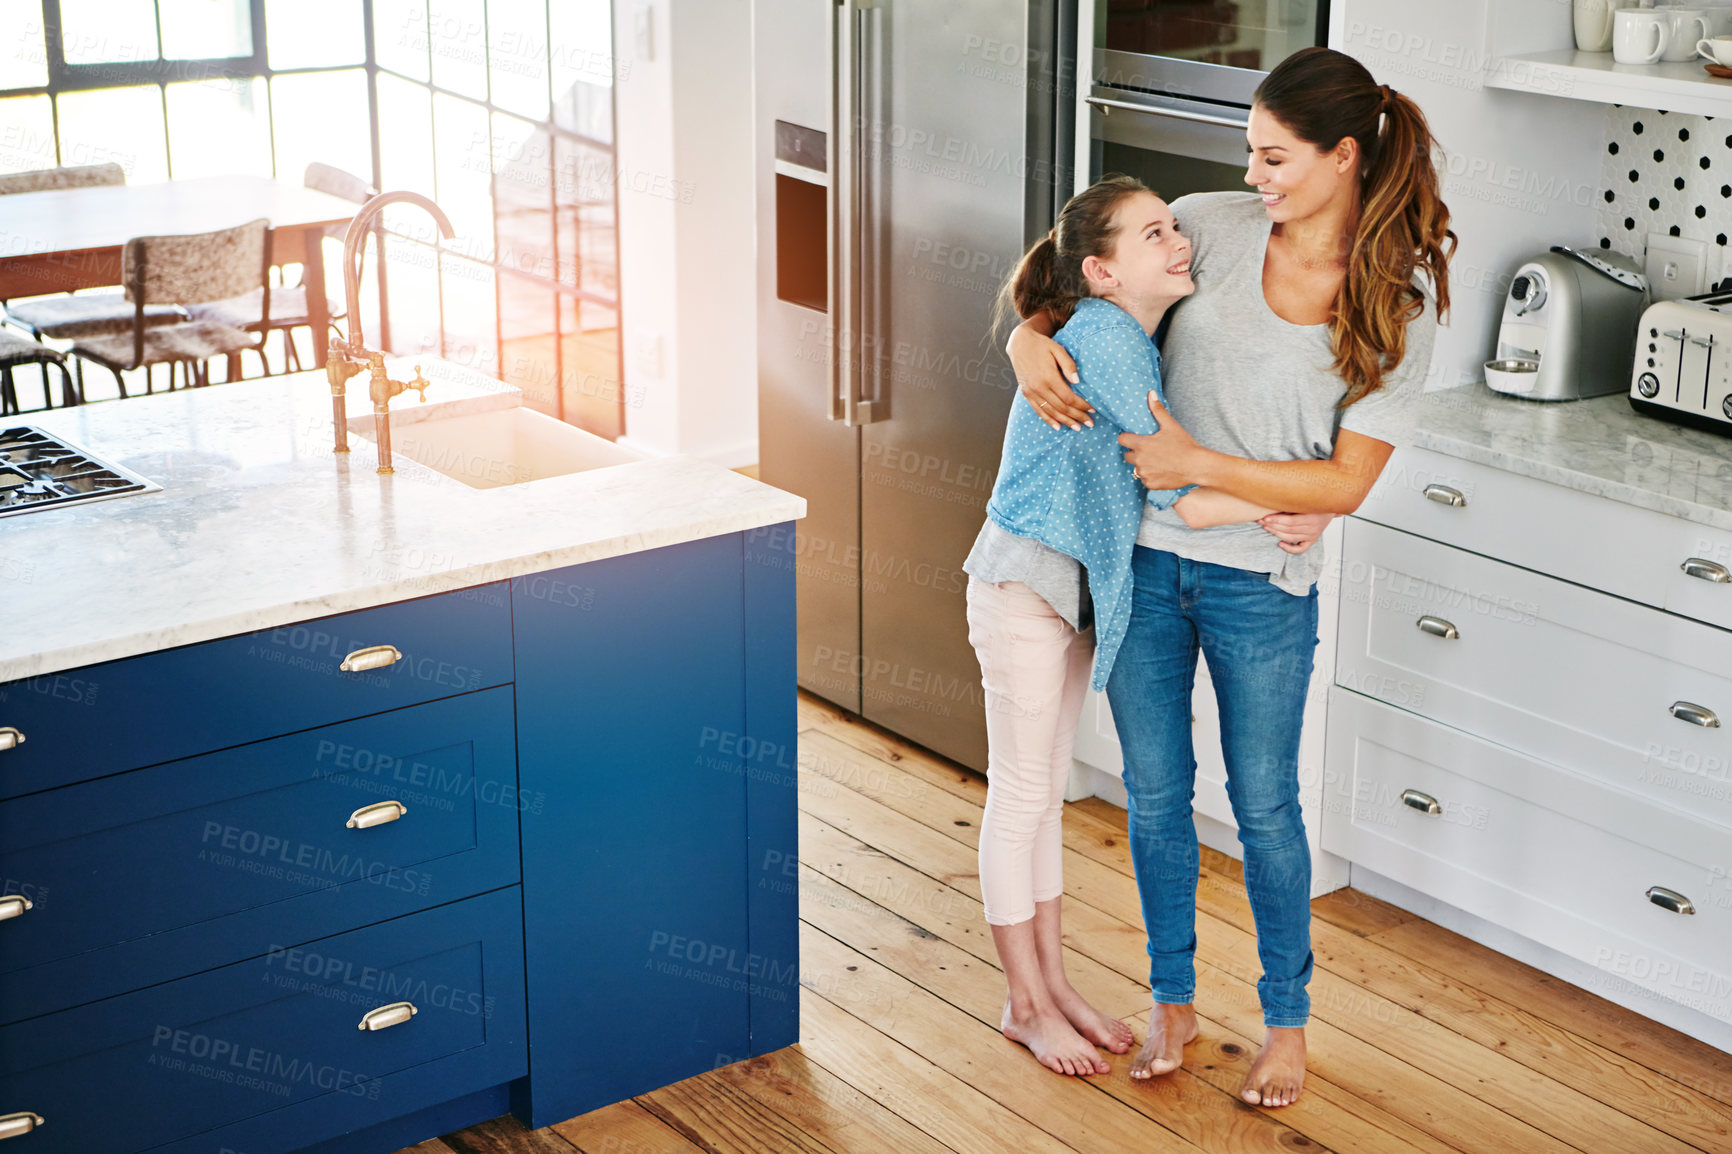 Buy stock photo Shot of a happy mother and daughter in a loving embrace at home